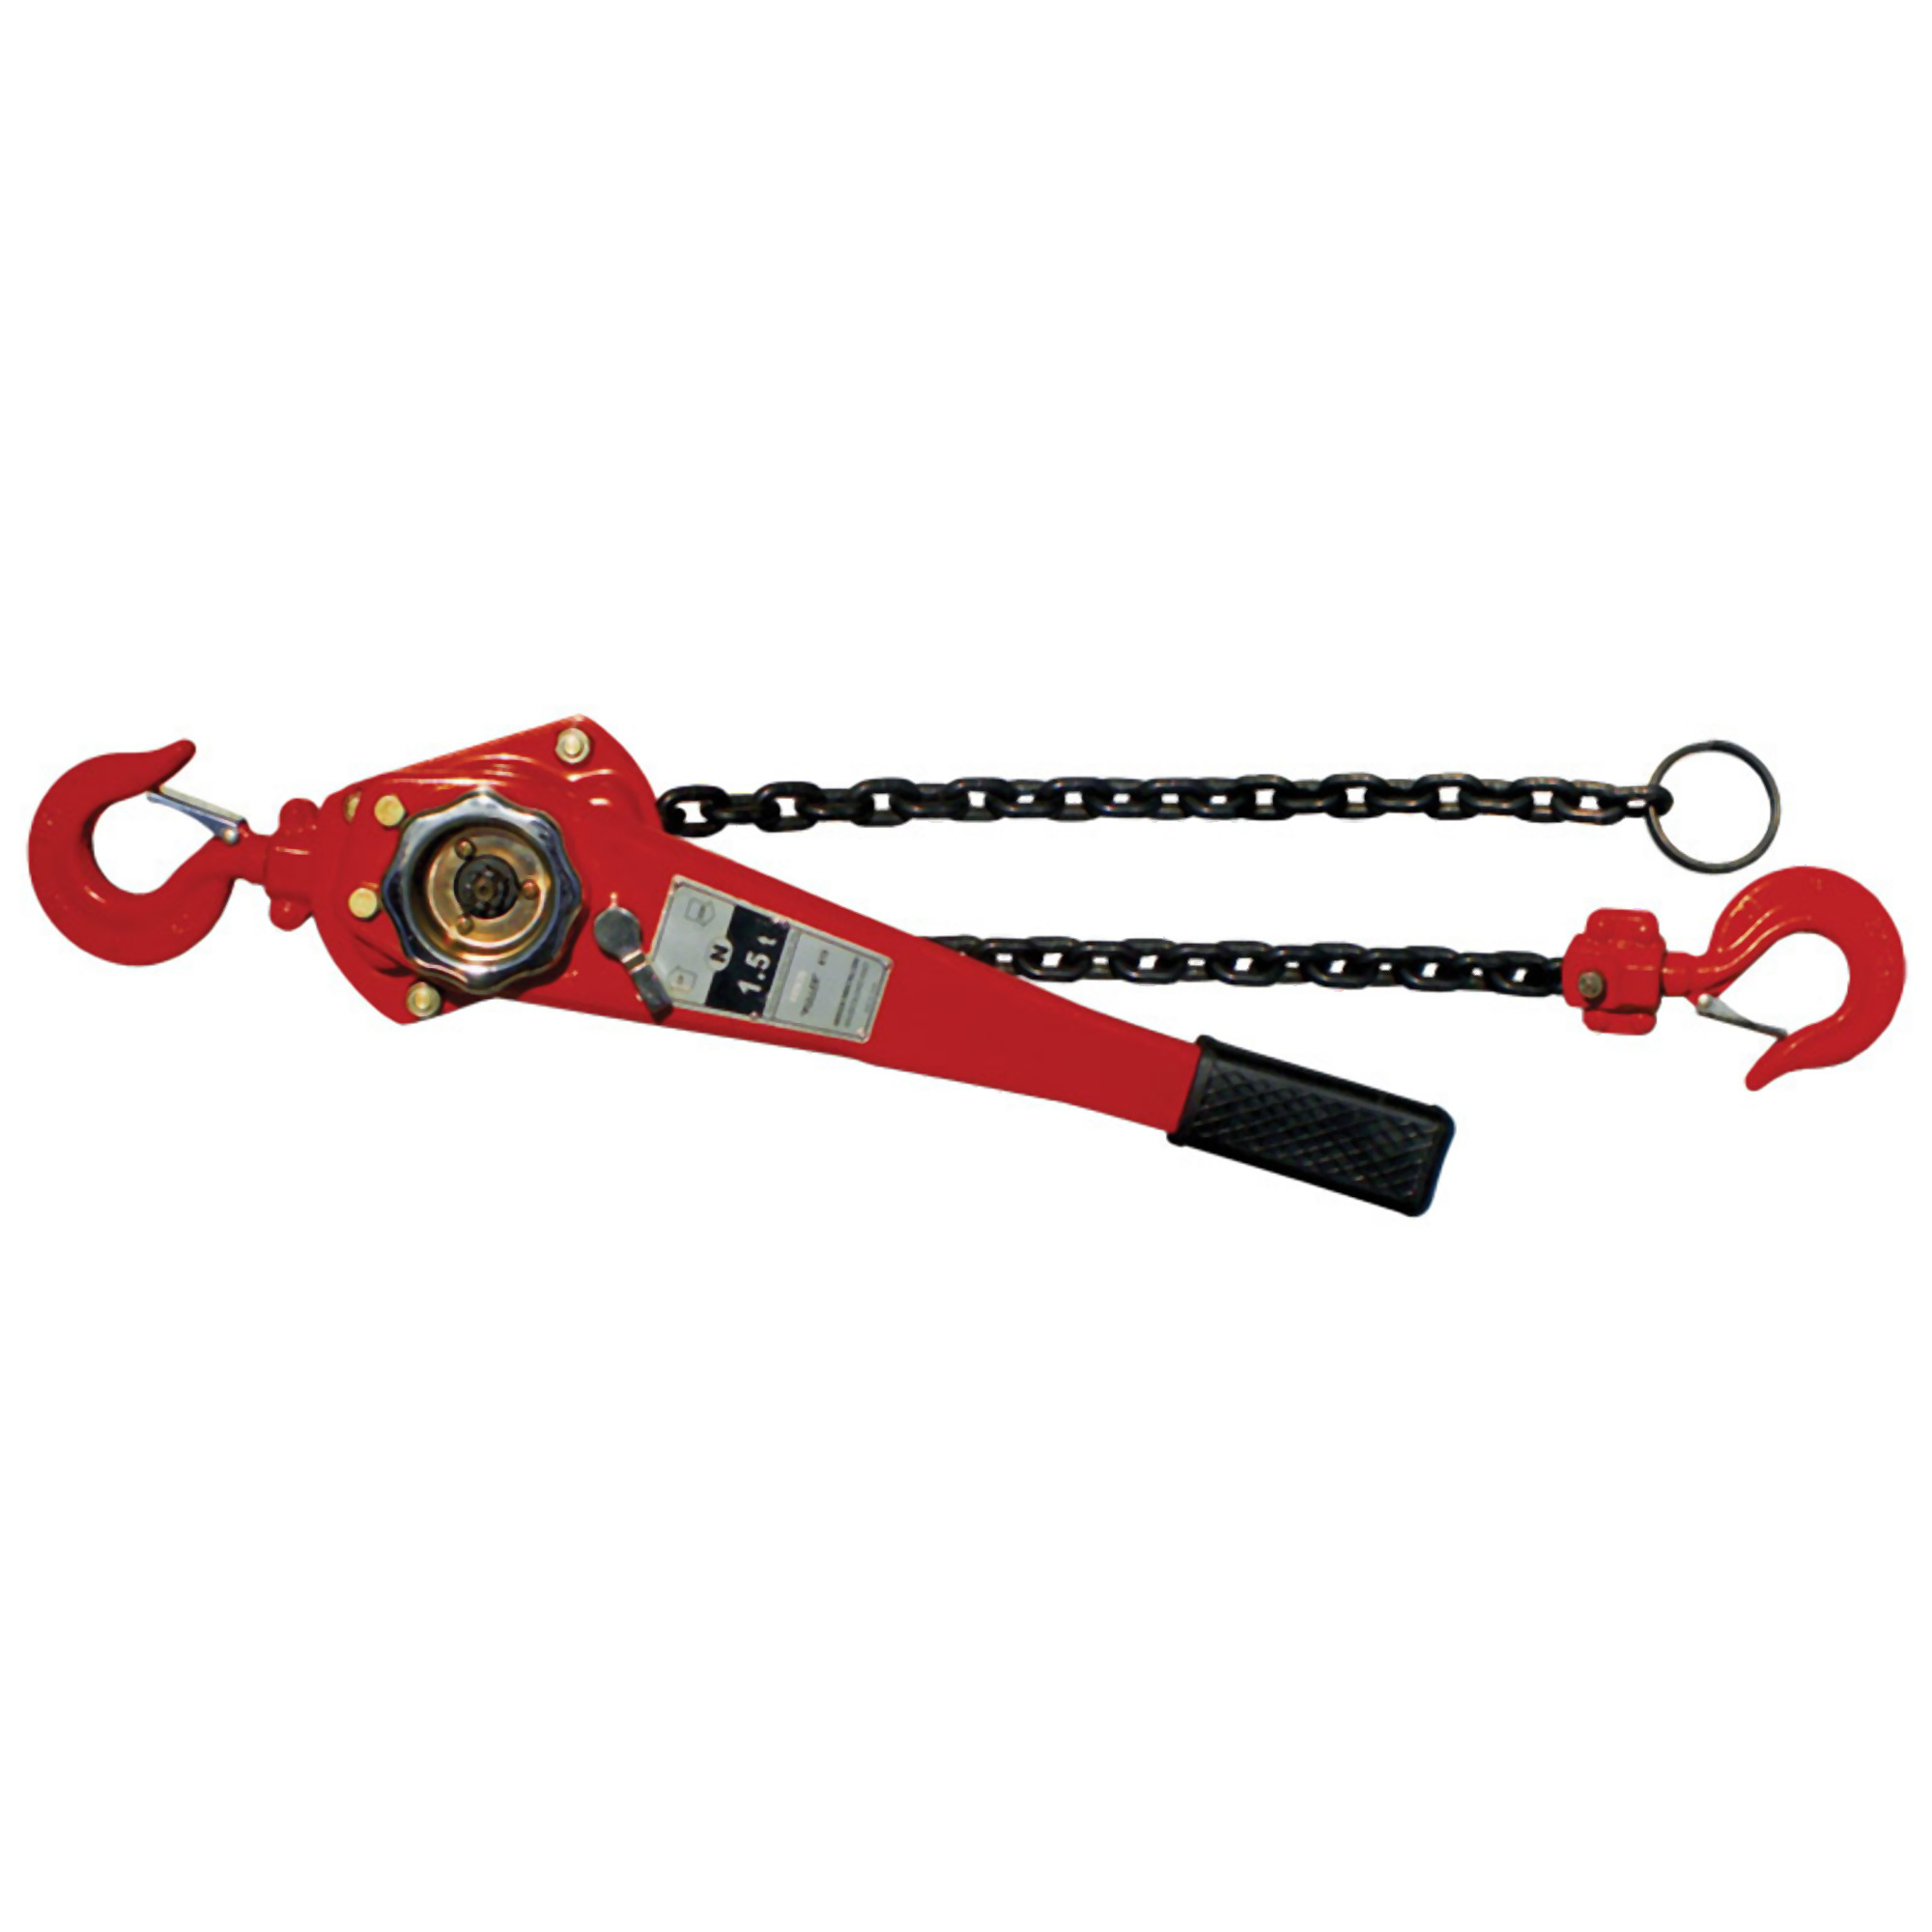 American Power Pull, 1.5 ton chain puller w/ 20ft. lift, Power Source Manual Lever, Capacity 3000 lb, Lift Height 20 ft, Model 615-20